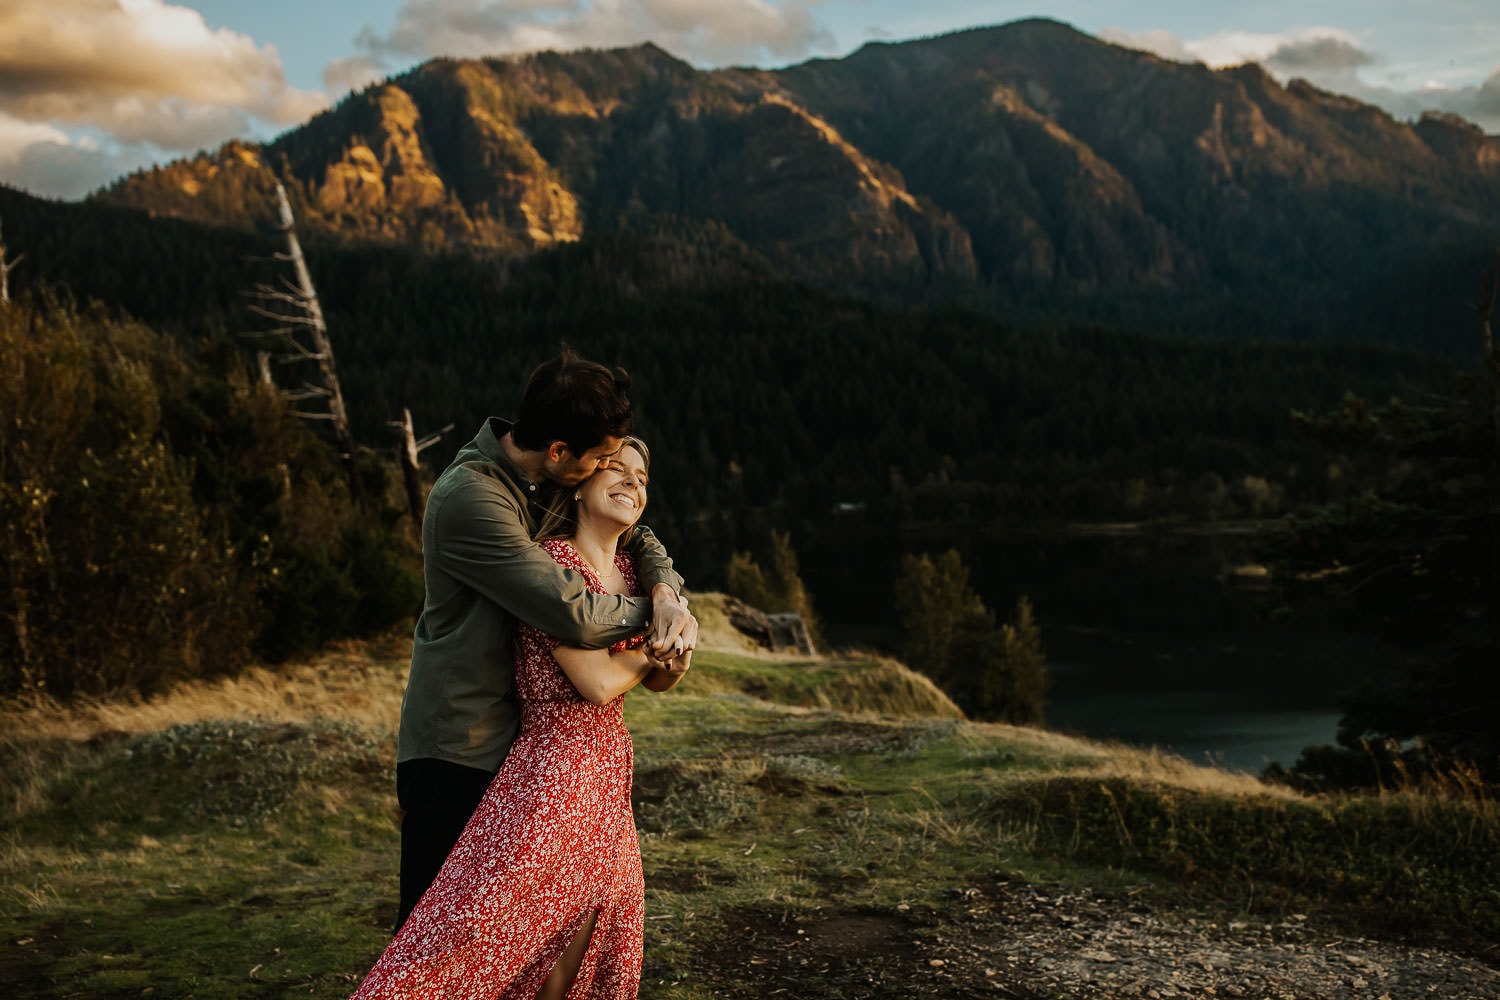 Engagement photographer near PDX - Couple hugging with mountains behind them